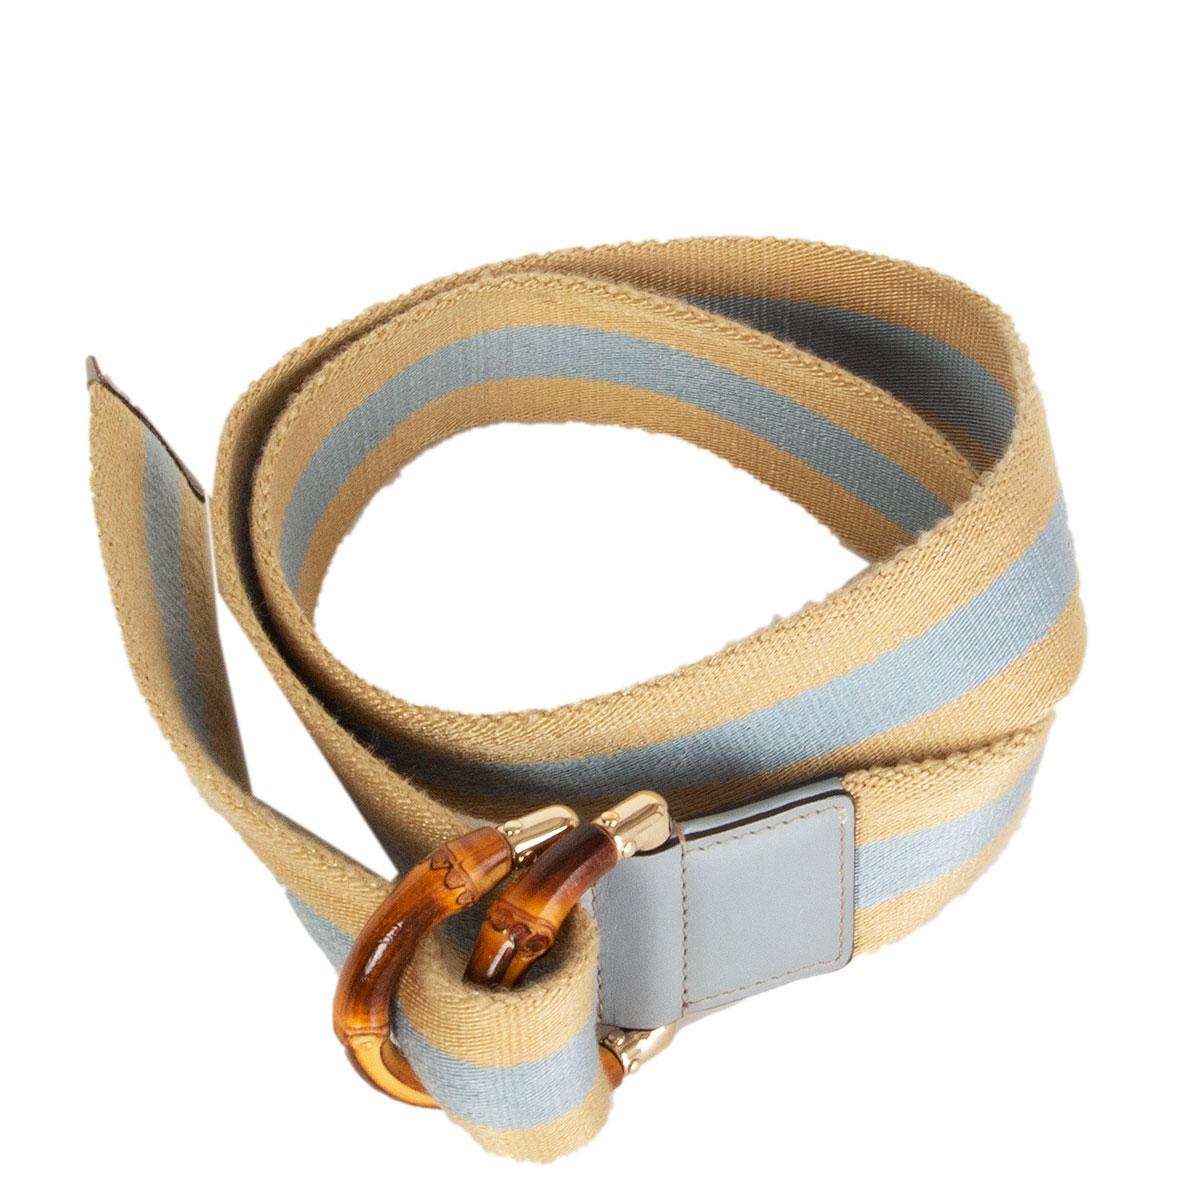 100% authentic Gucci web belt in light gold and light blue cotton blend featuring brown bamboo crest slip lock buckle. Has been worn and is in excellent condition. 

Tag Size 90
Width 4cm (1.6in)
Length 111cm (43.3in)
Buckle Size Height 6cm